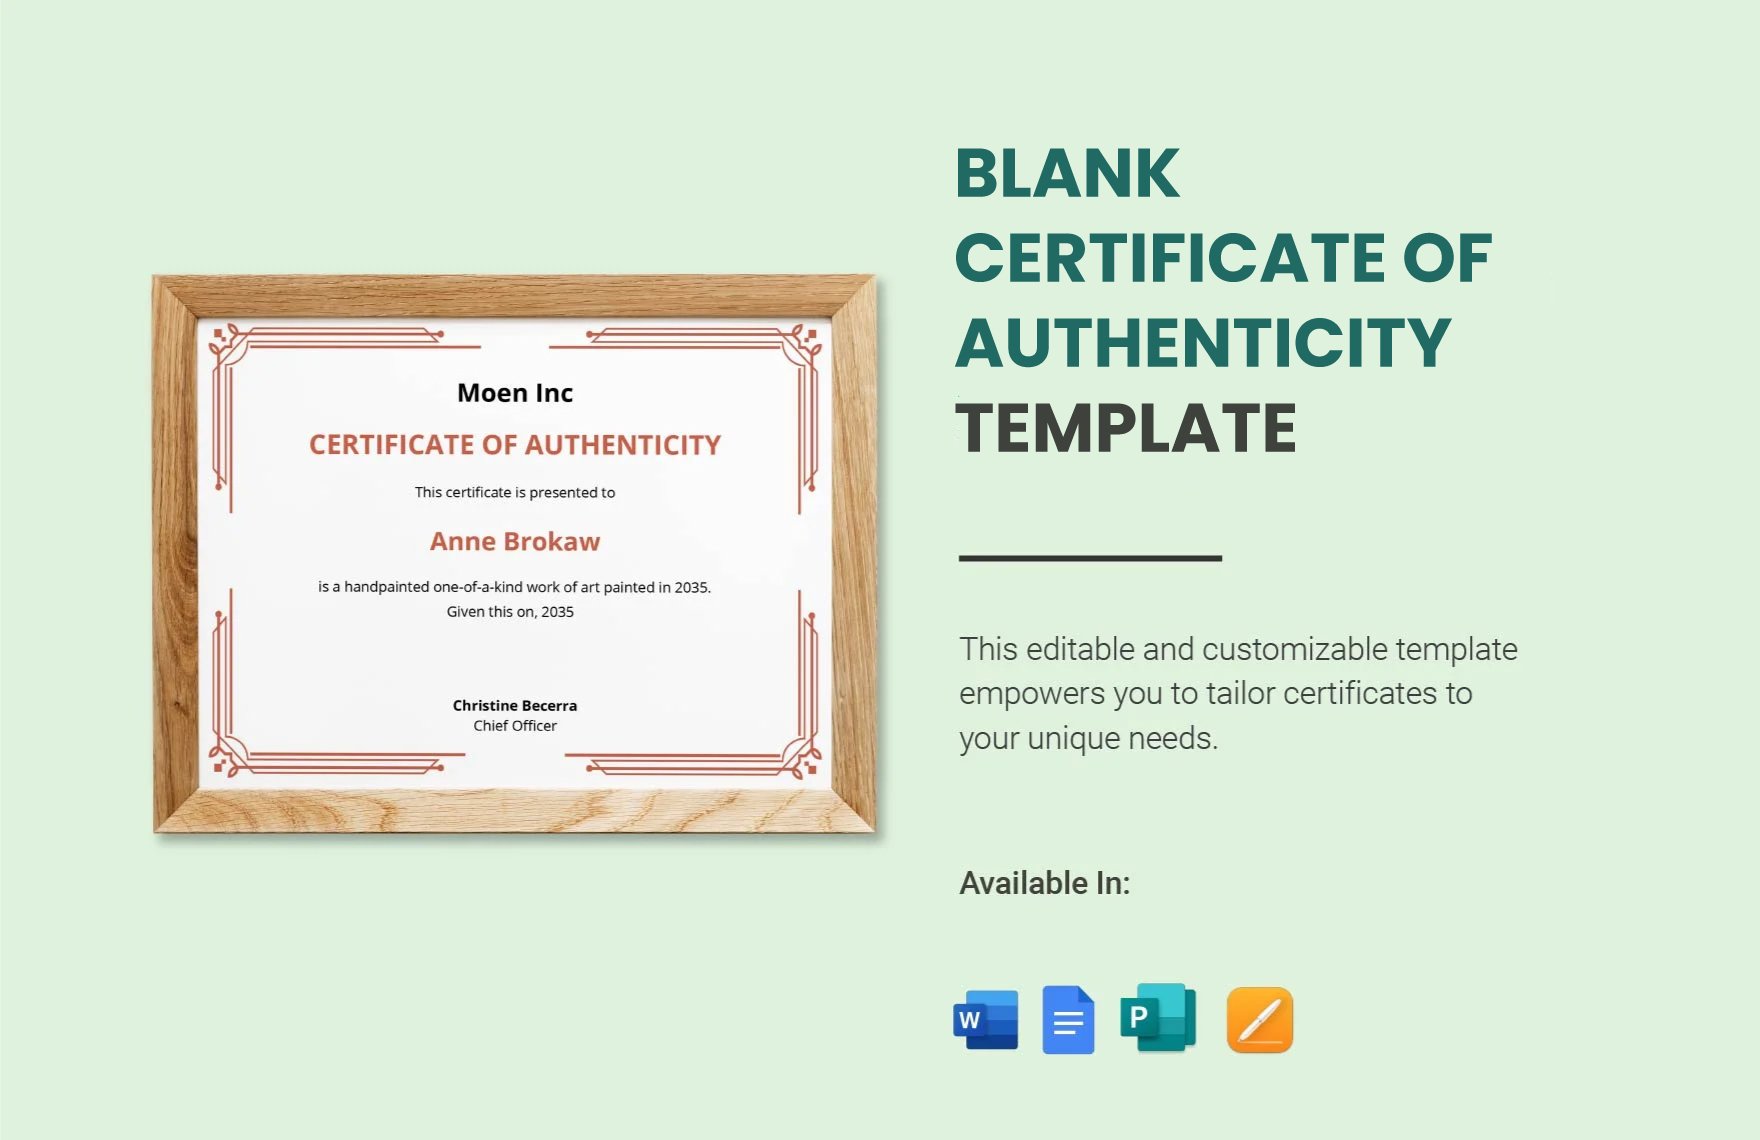 Blank Certificate Of Authenticity Template in Word, Google Docs, Apple Pages, Publisher